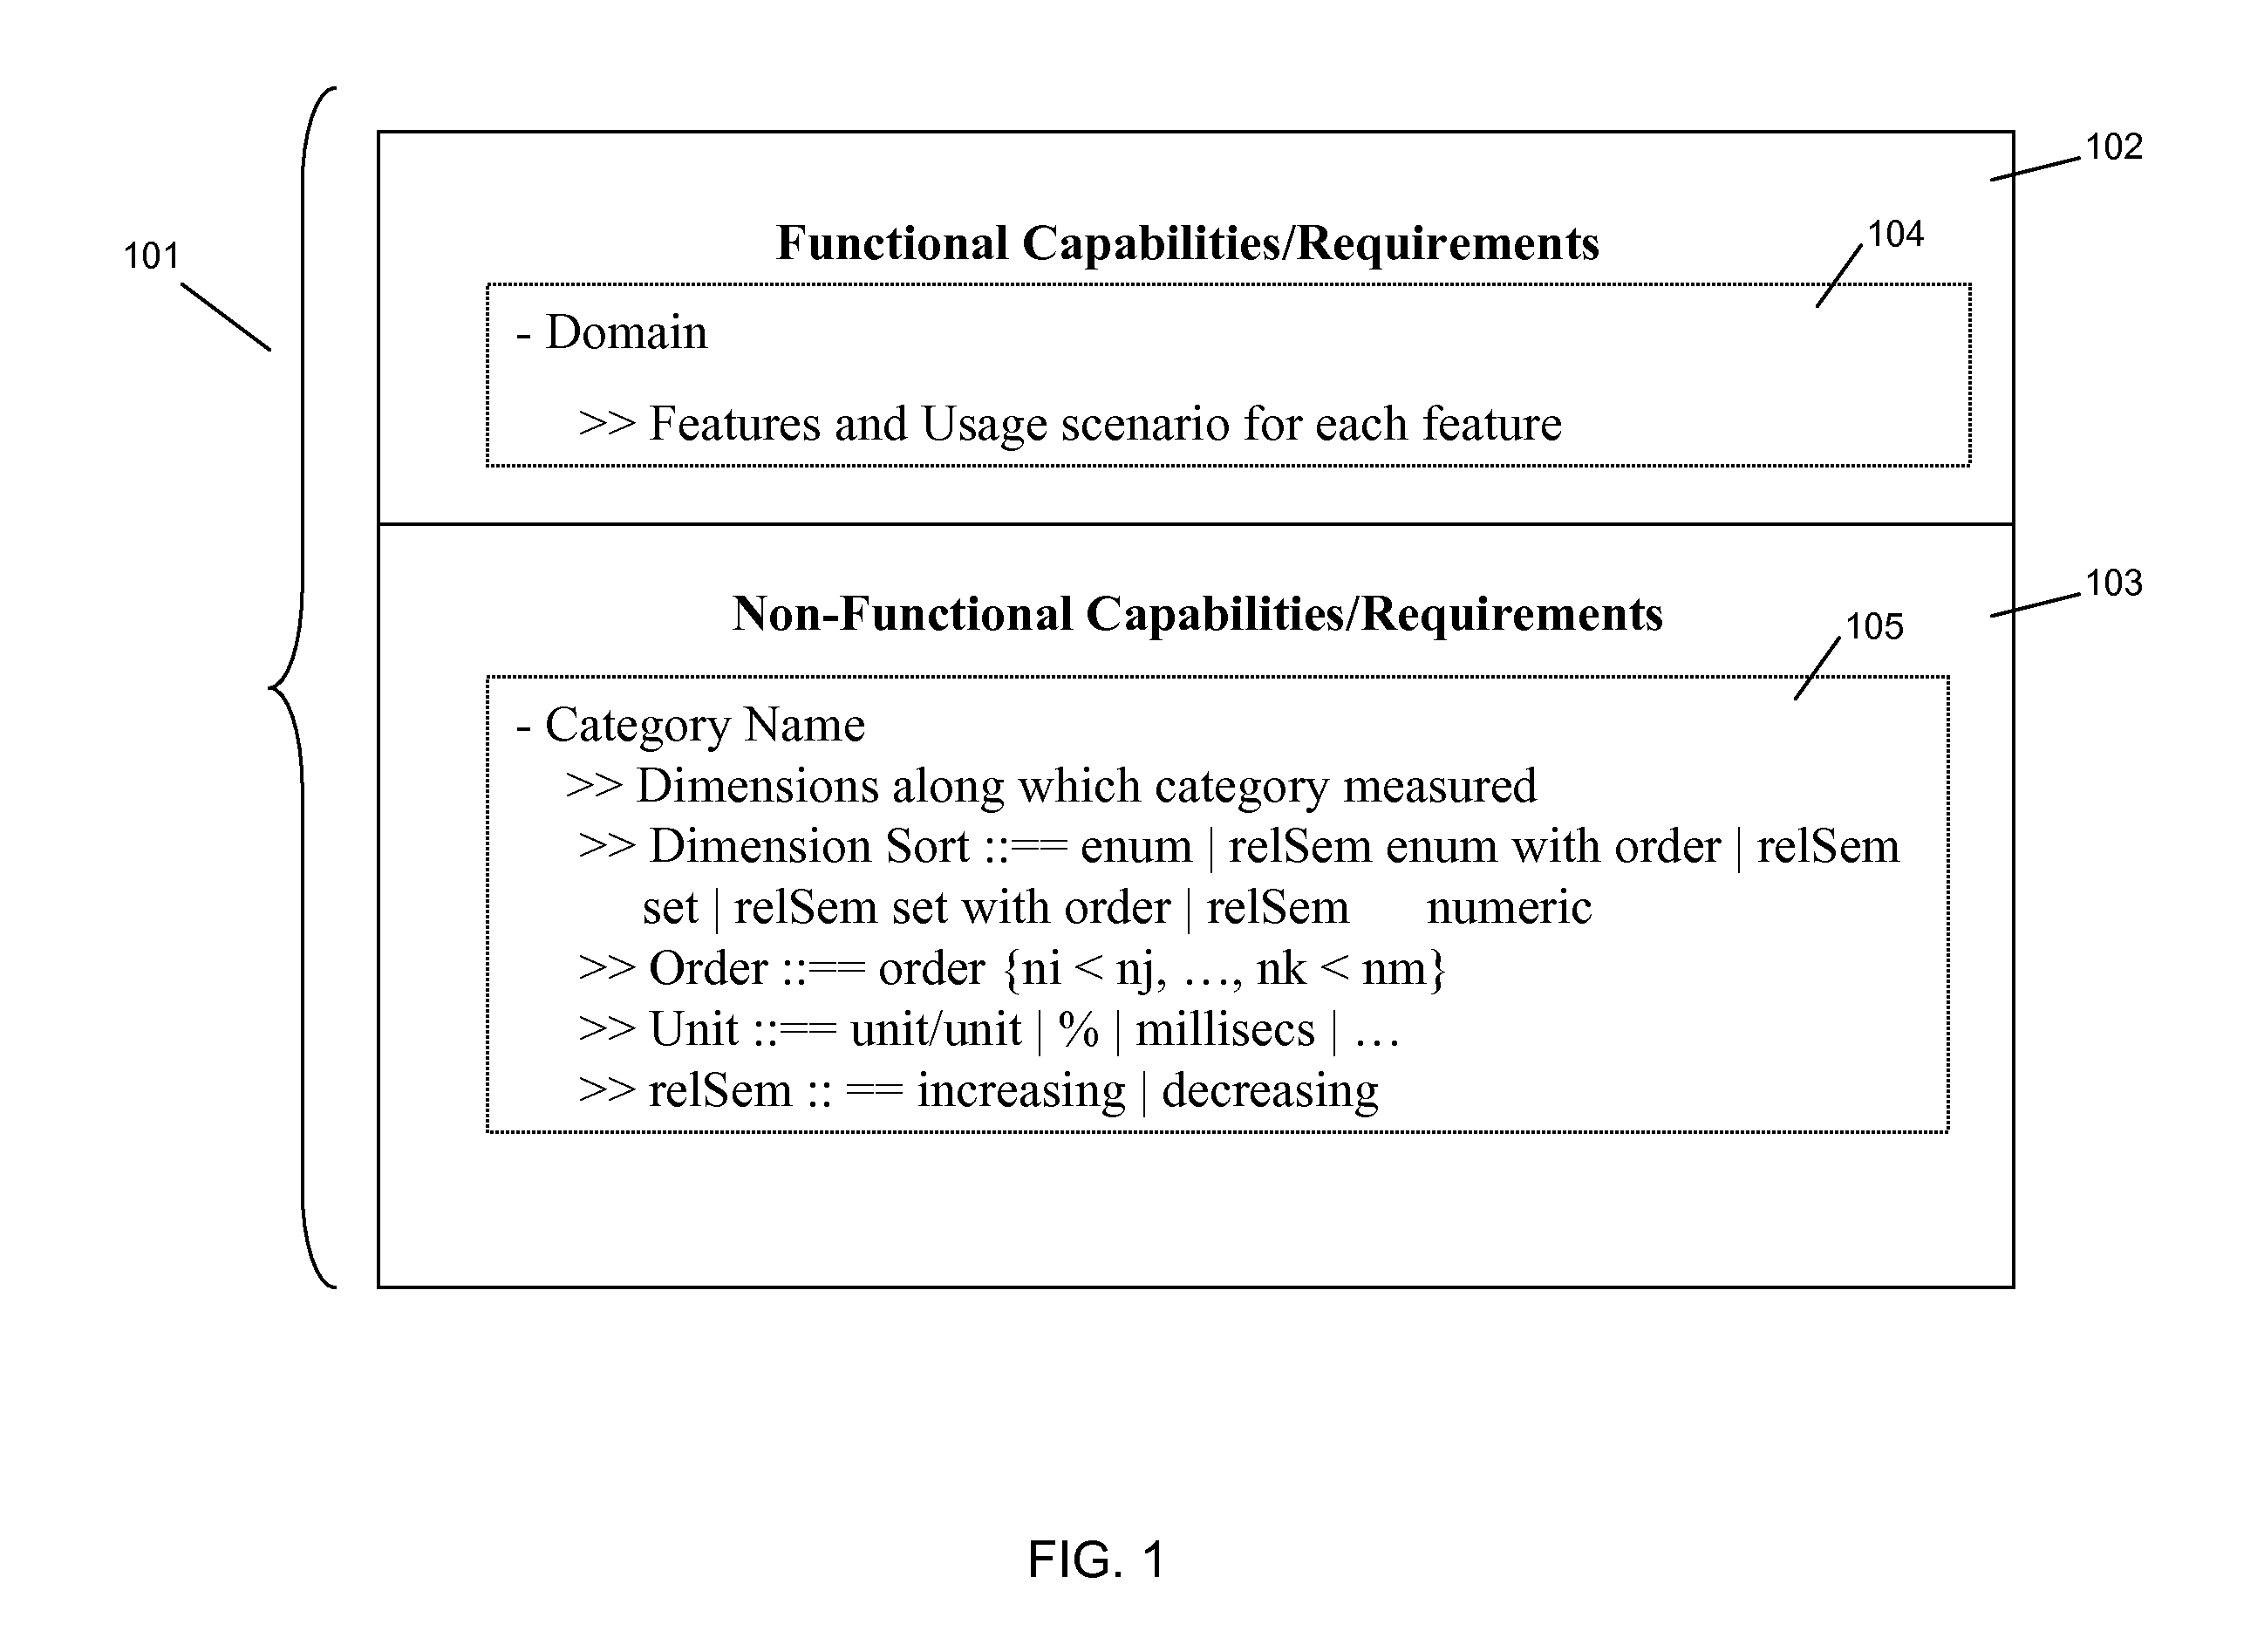 Systems and methods for modeling and analyzing solution requirements and assets